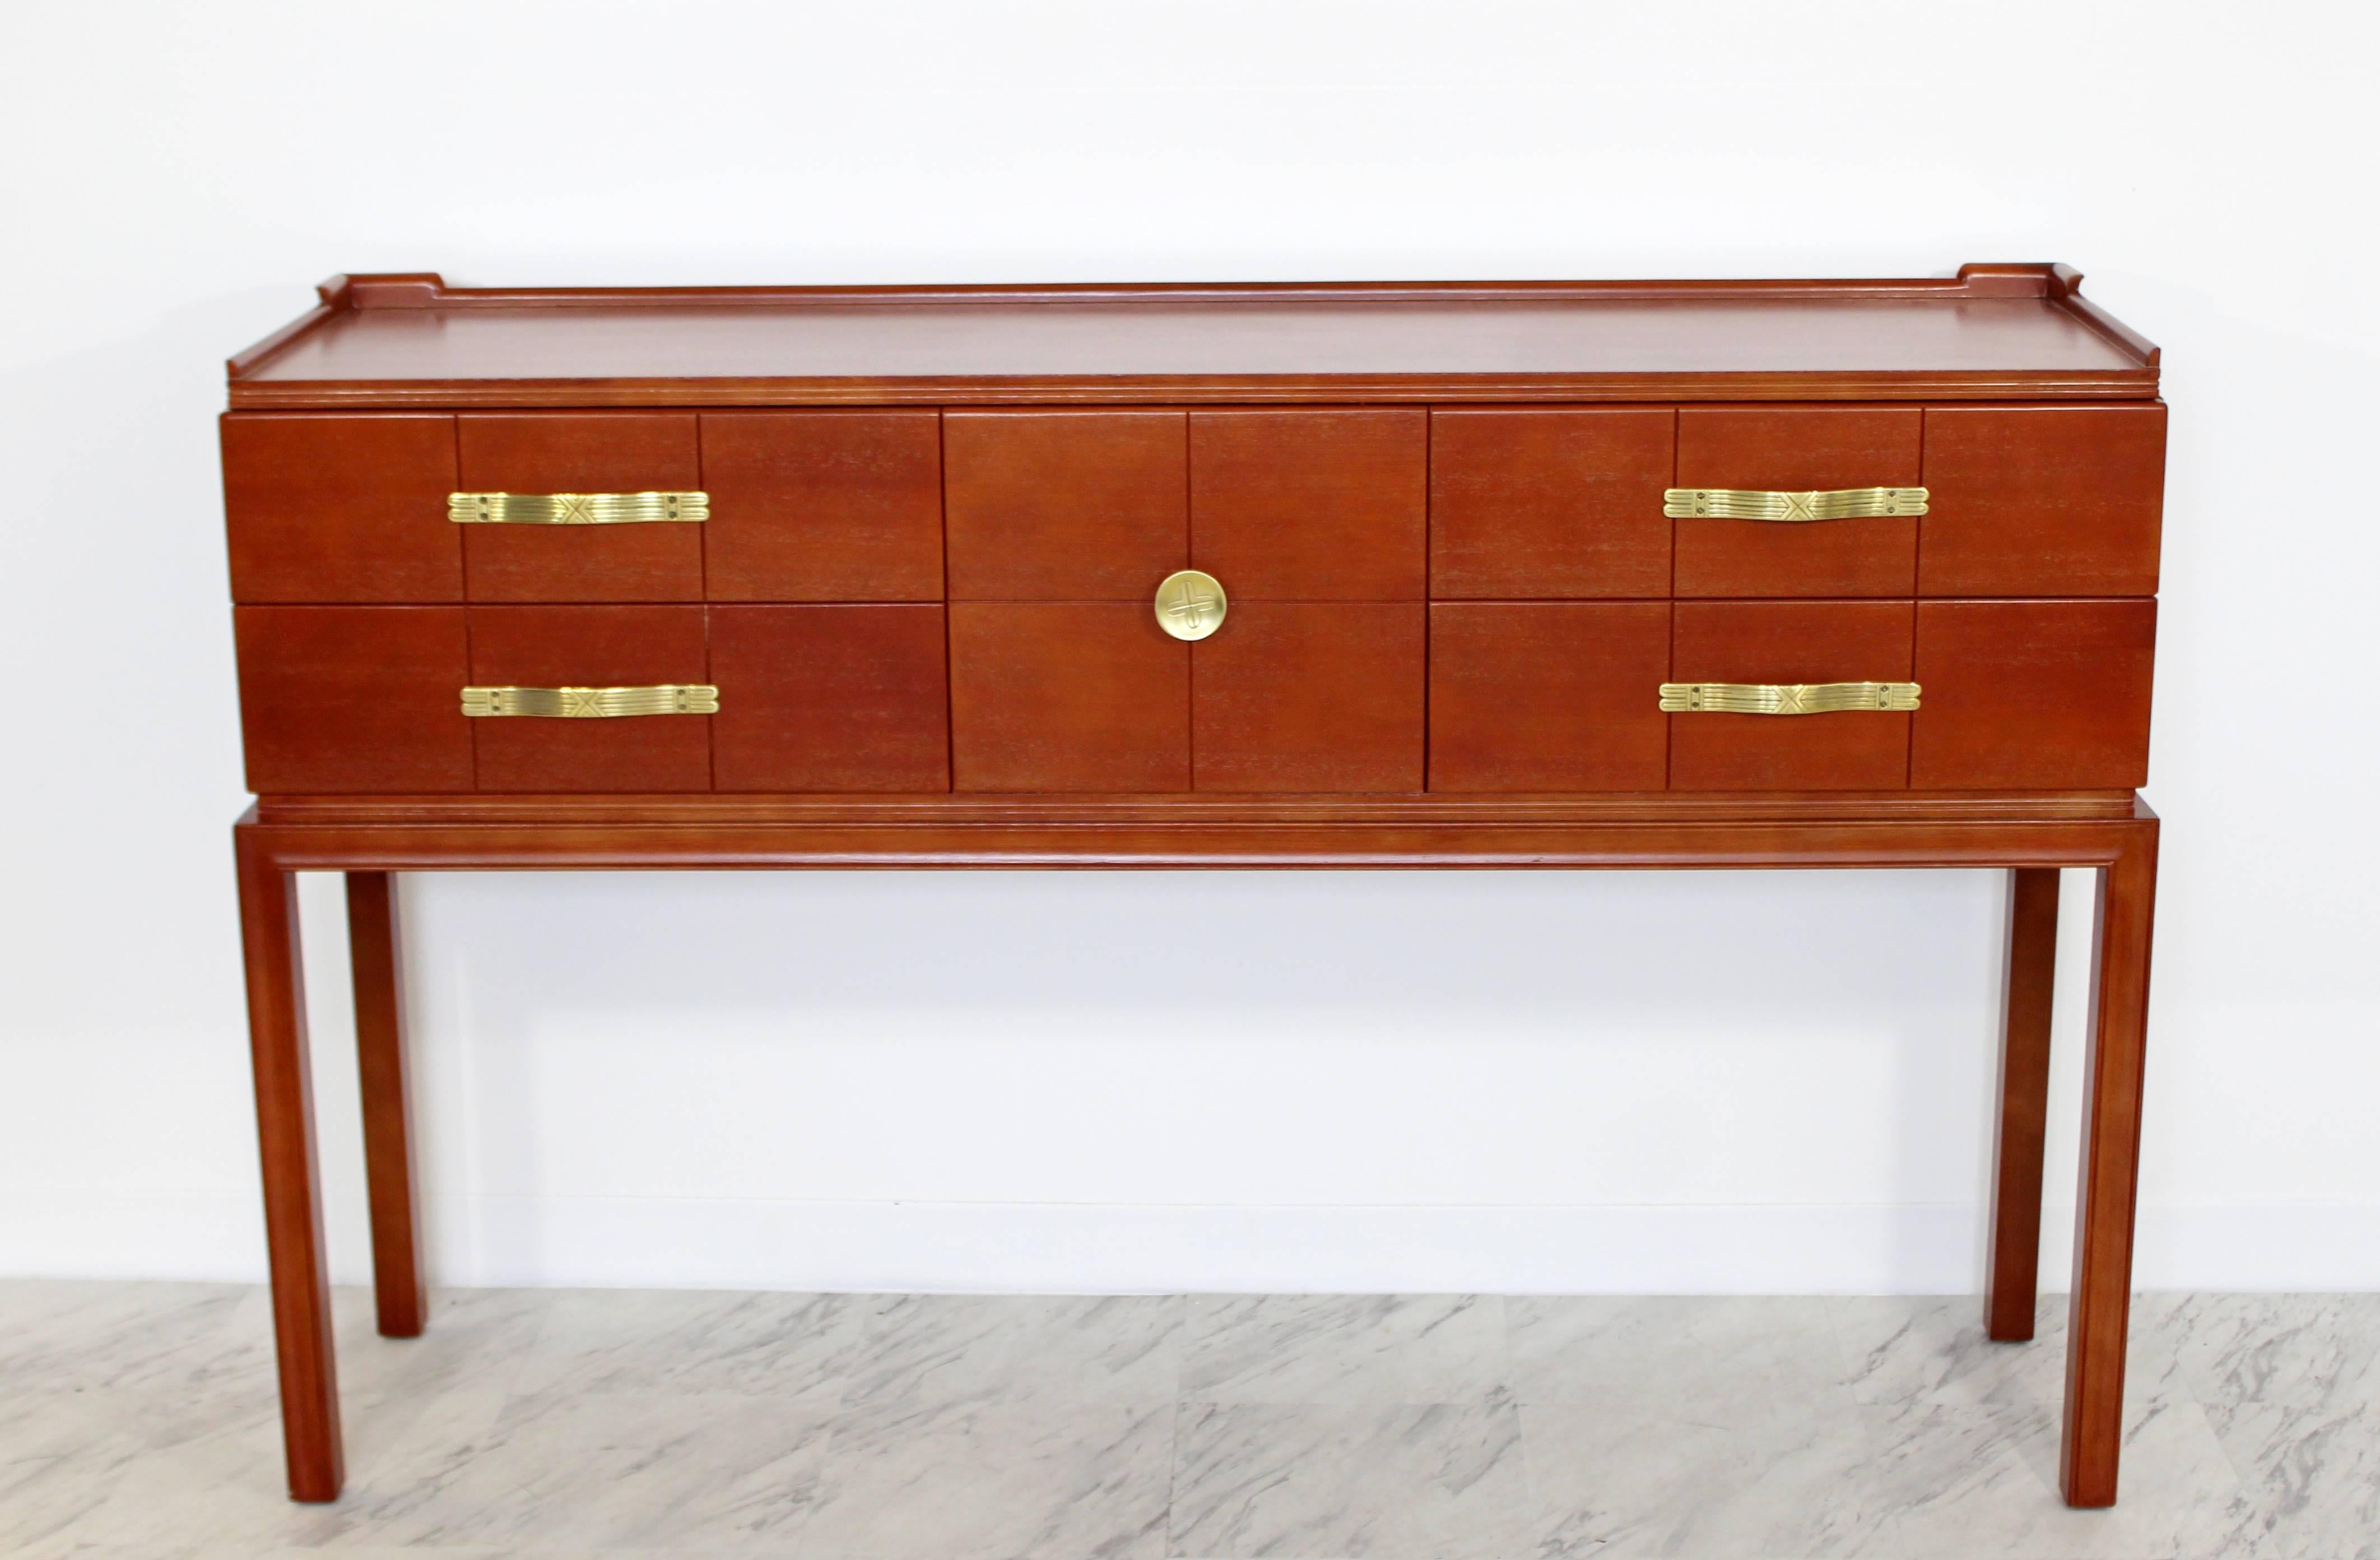 For your consideration is an absolutely stunning console table, with four drawers that have bronze pulls, by Tommi Parzinger for Charak modern, circa the 1950s. In excellent condition, just came back from being professionally refinished. The